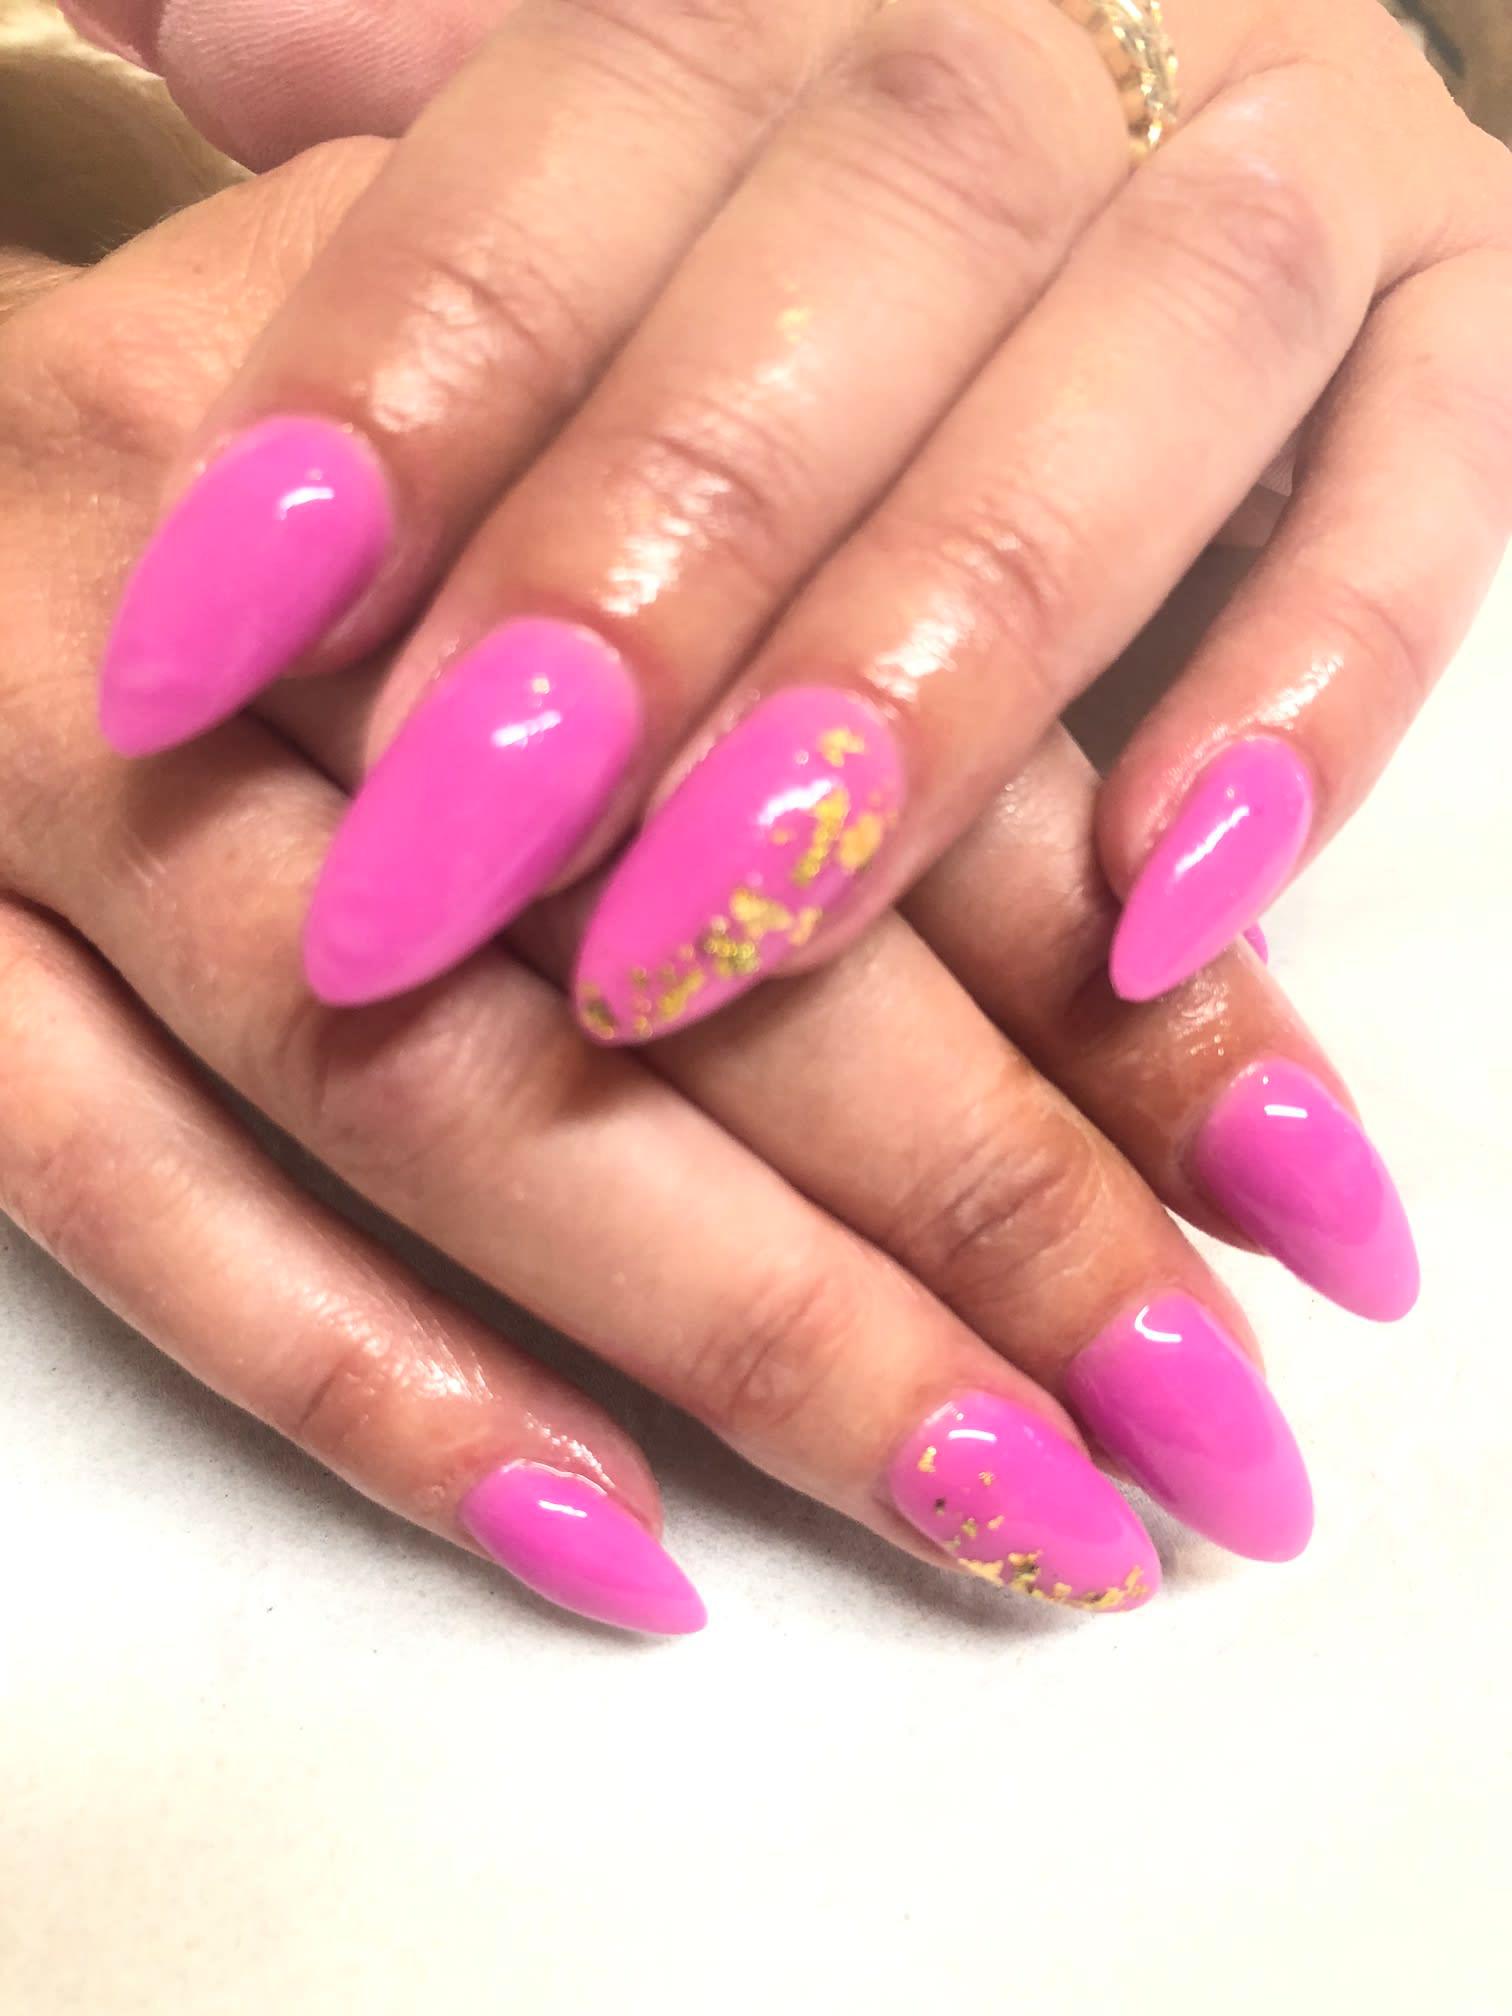 Tayne Nails And Beauty Bridgwater 07775 885300